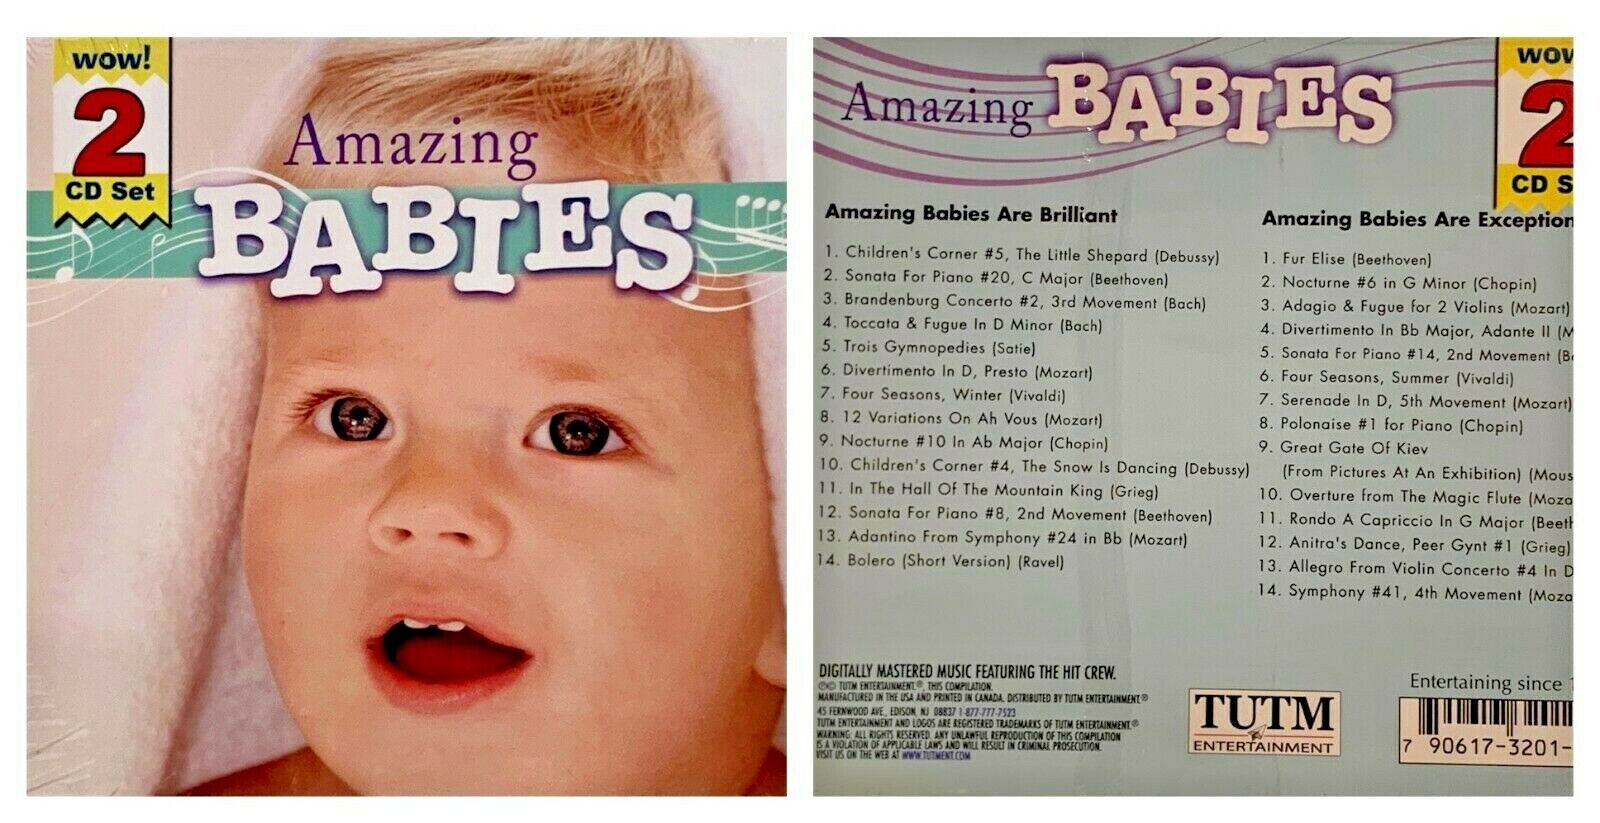 NEW Drew\'s Famous AMAZING BABIES ARE BRILLIANT MUSIC 2 CD Disc Set - Sealed